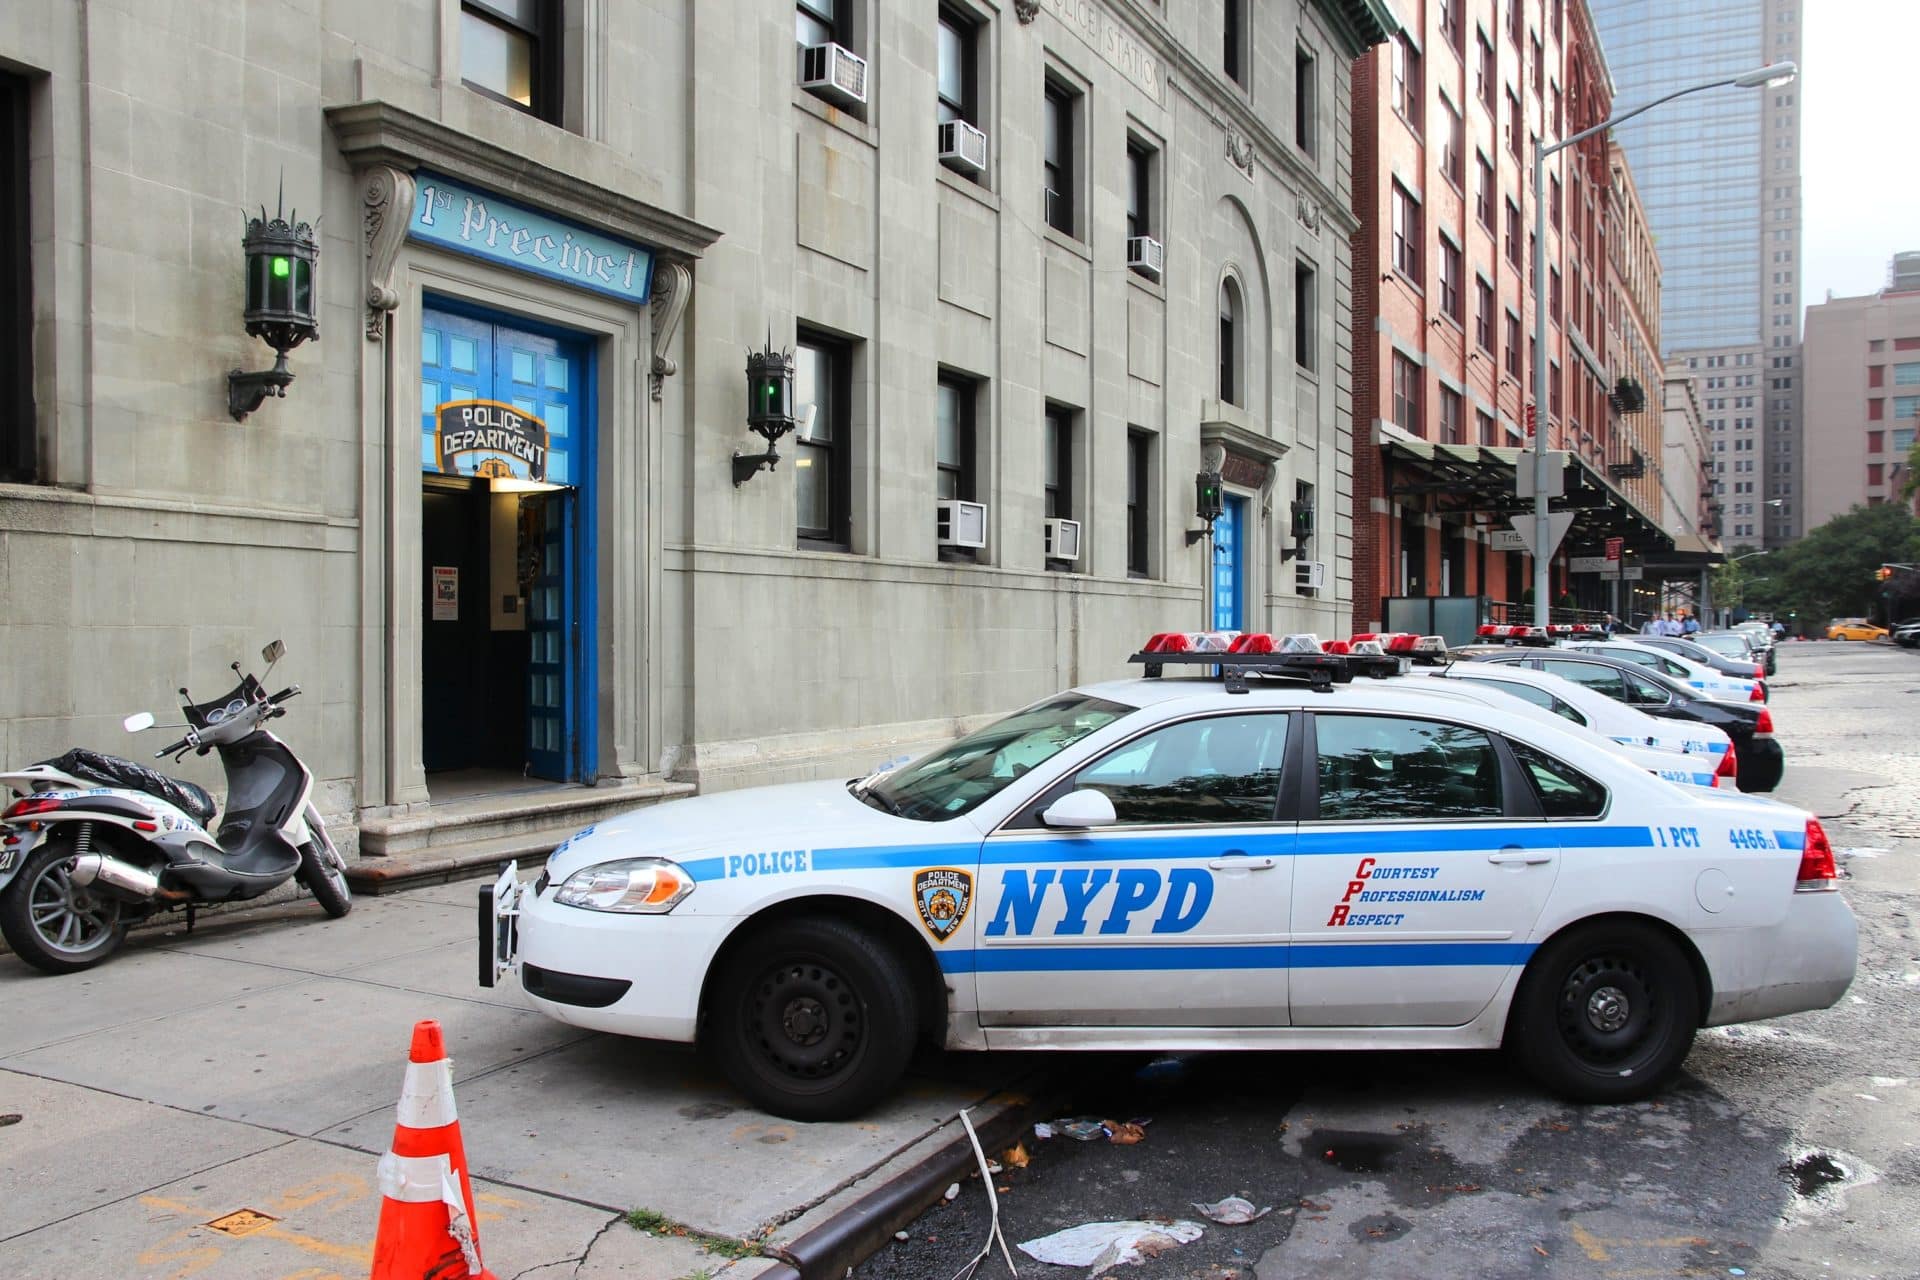 Were You Falsely Arrested in New York? You Have 90 Days to File Claim